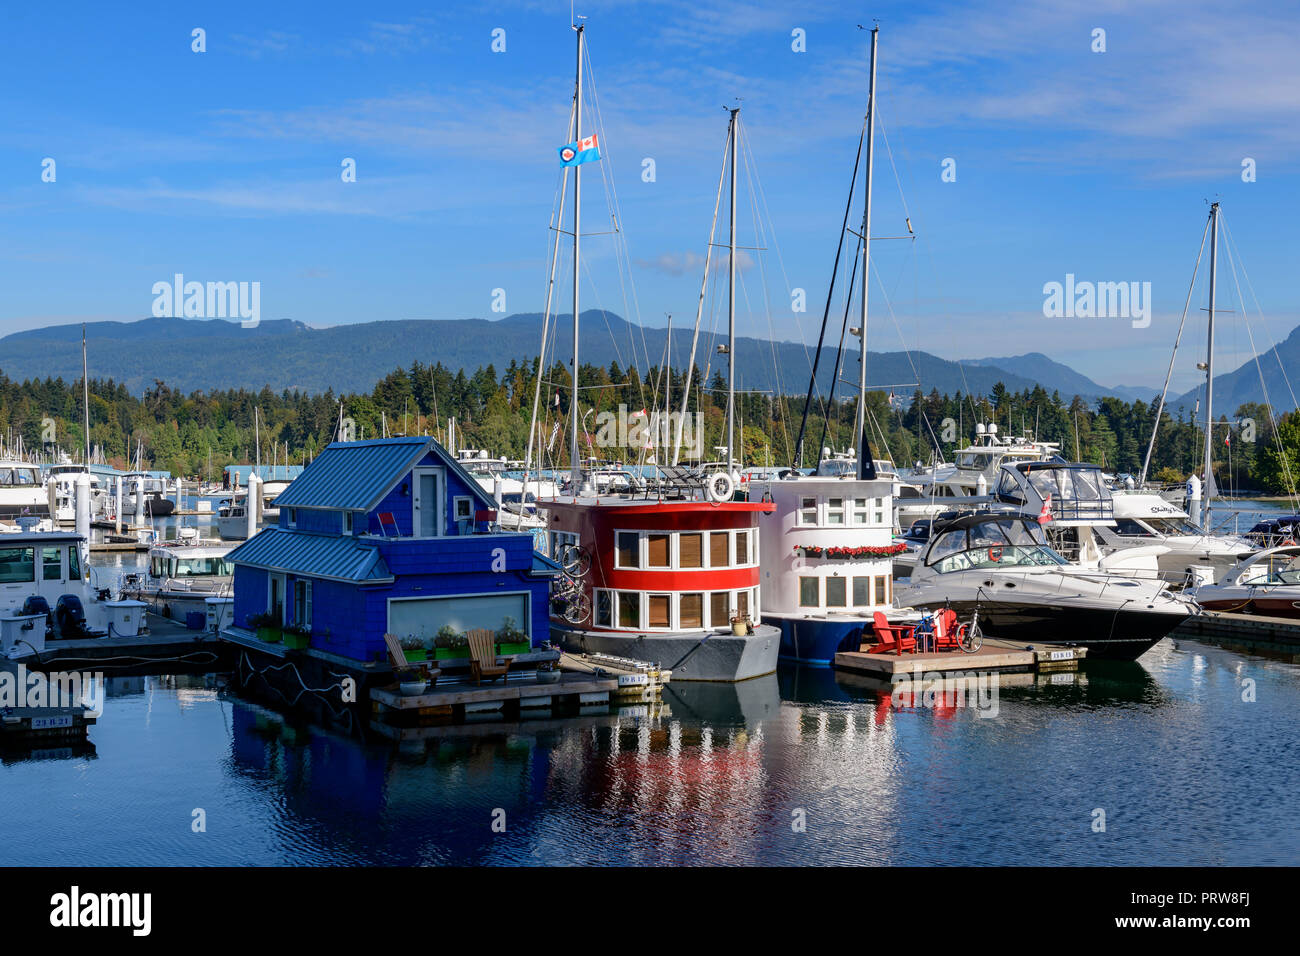 Delightfully quirky houseboats in Coal Harbour marina, Vancouver Stock Photo